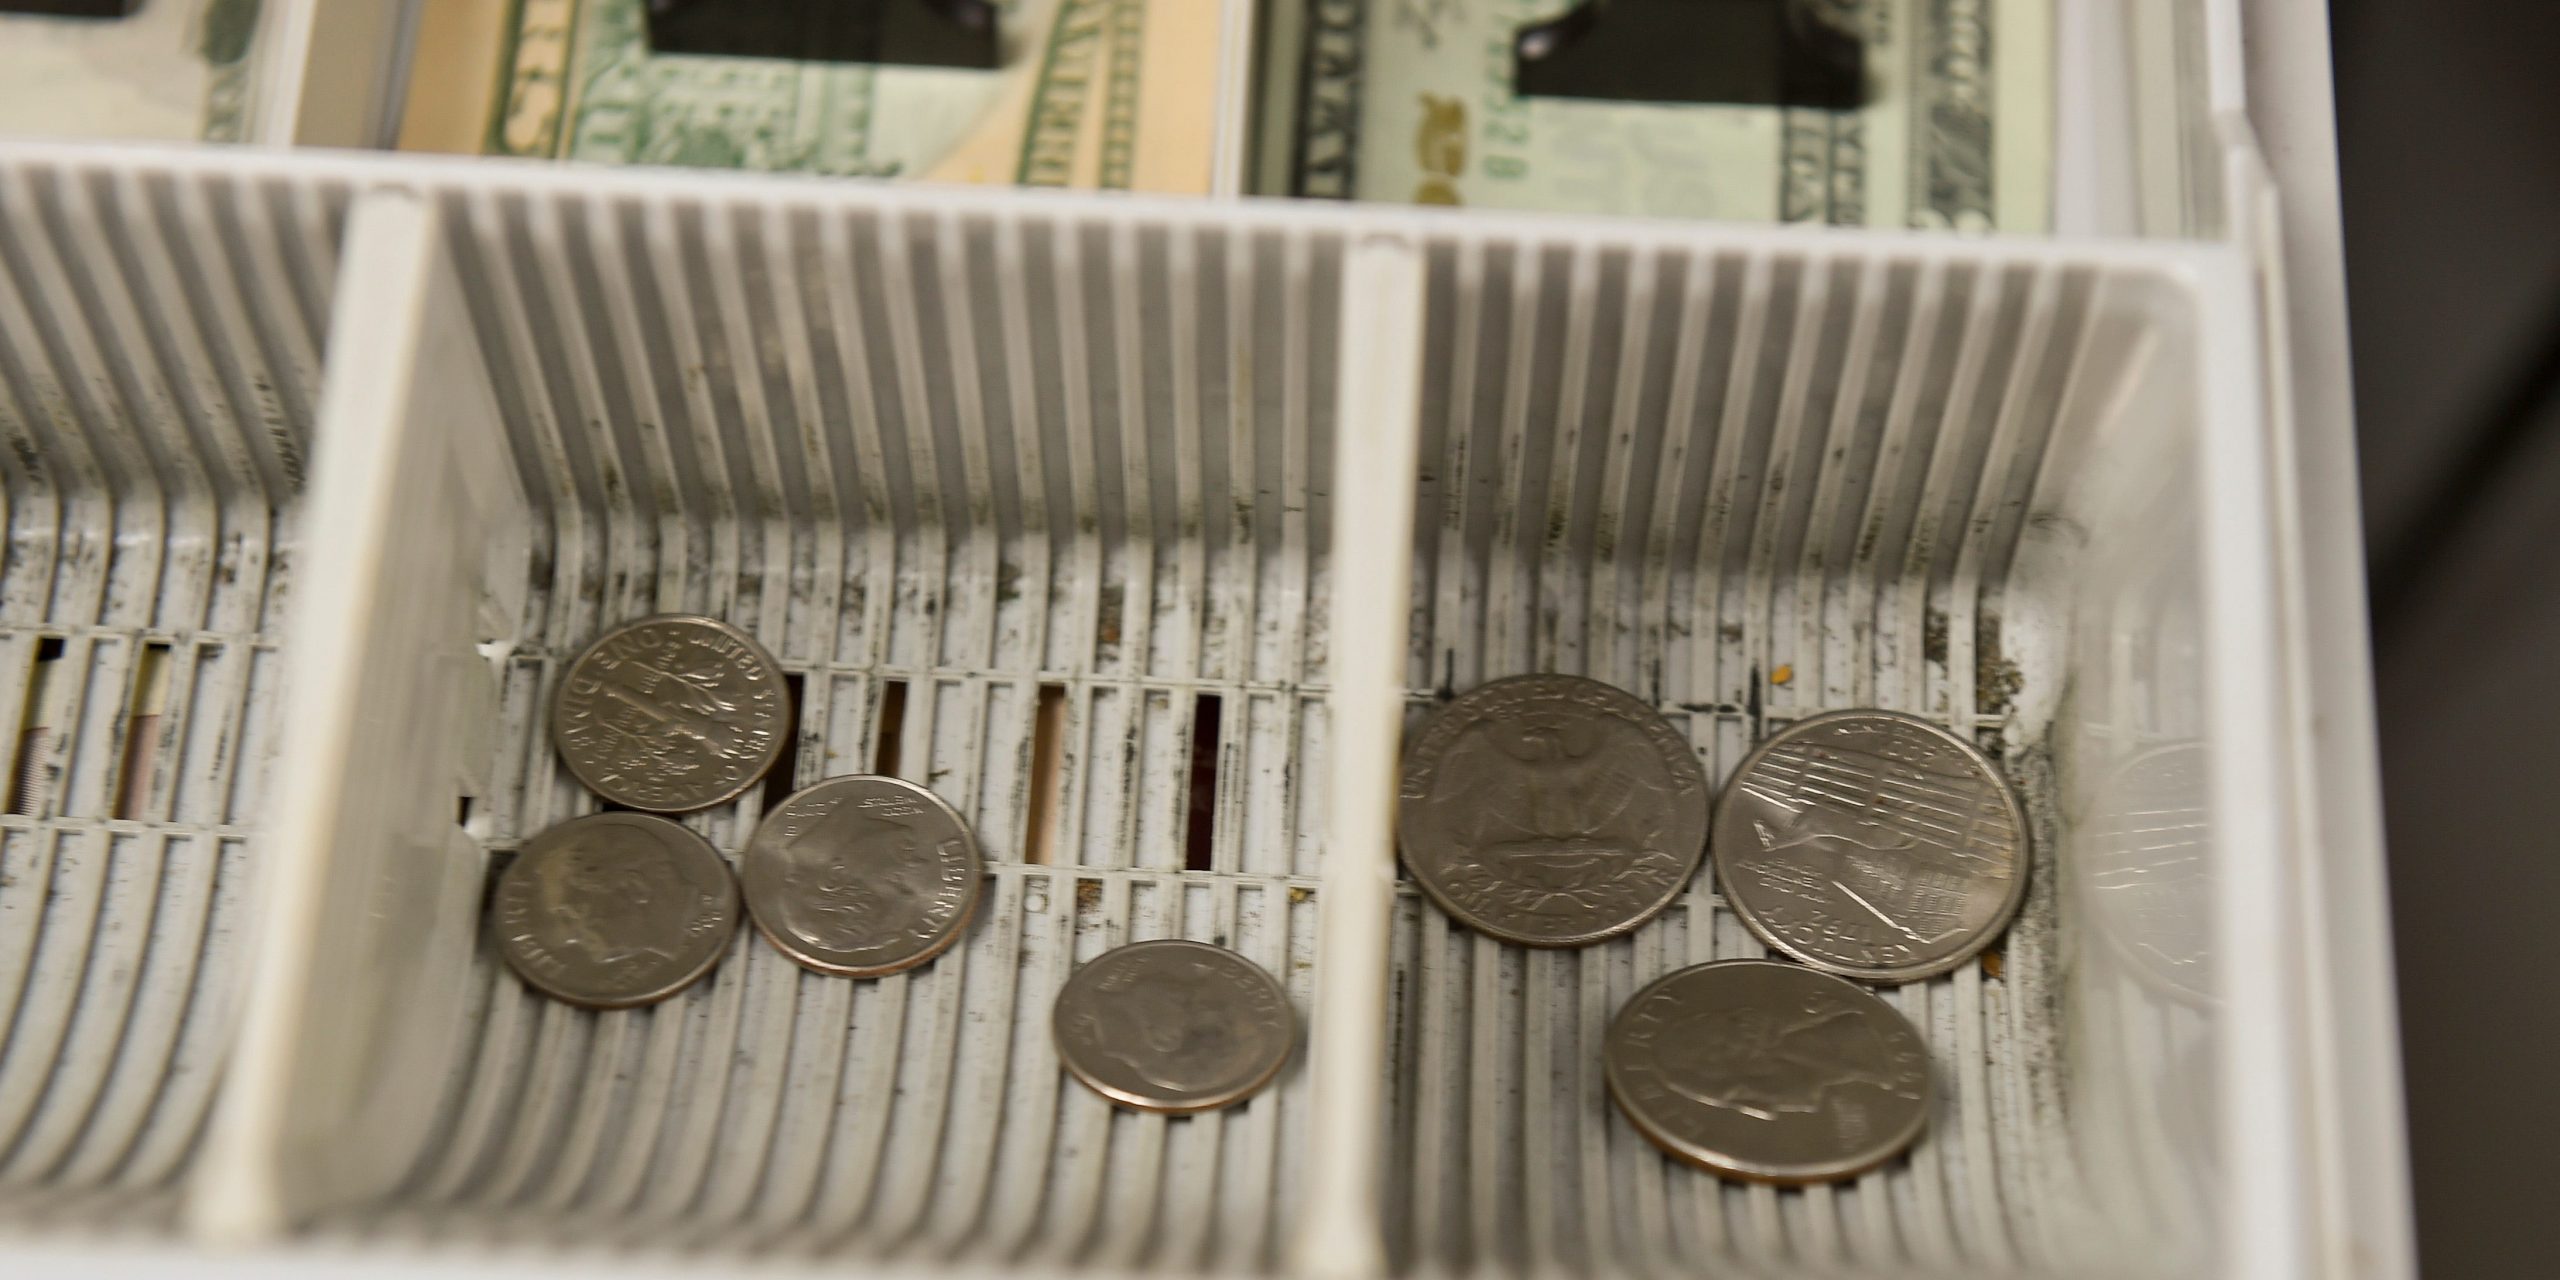 Your bank or grocery store might be out of coins, but the Fed says